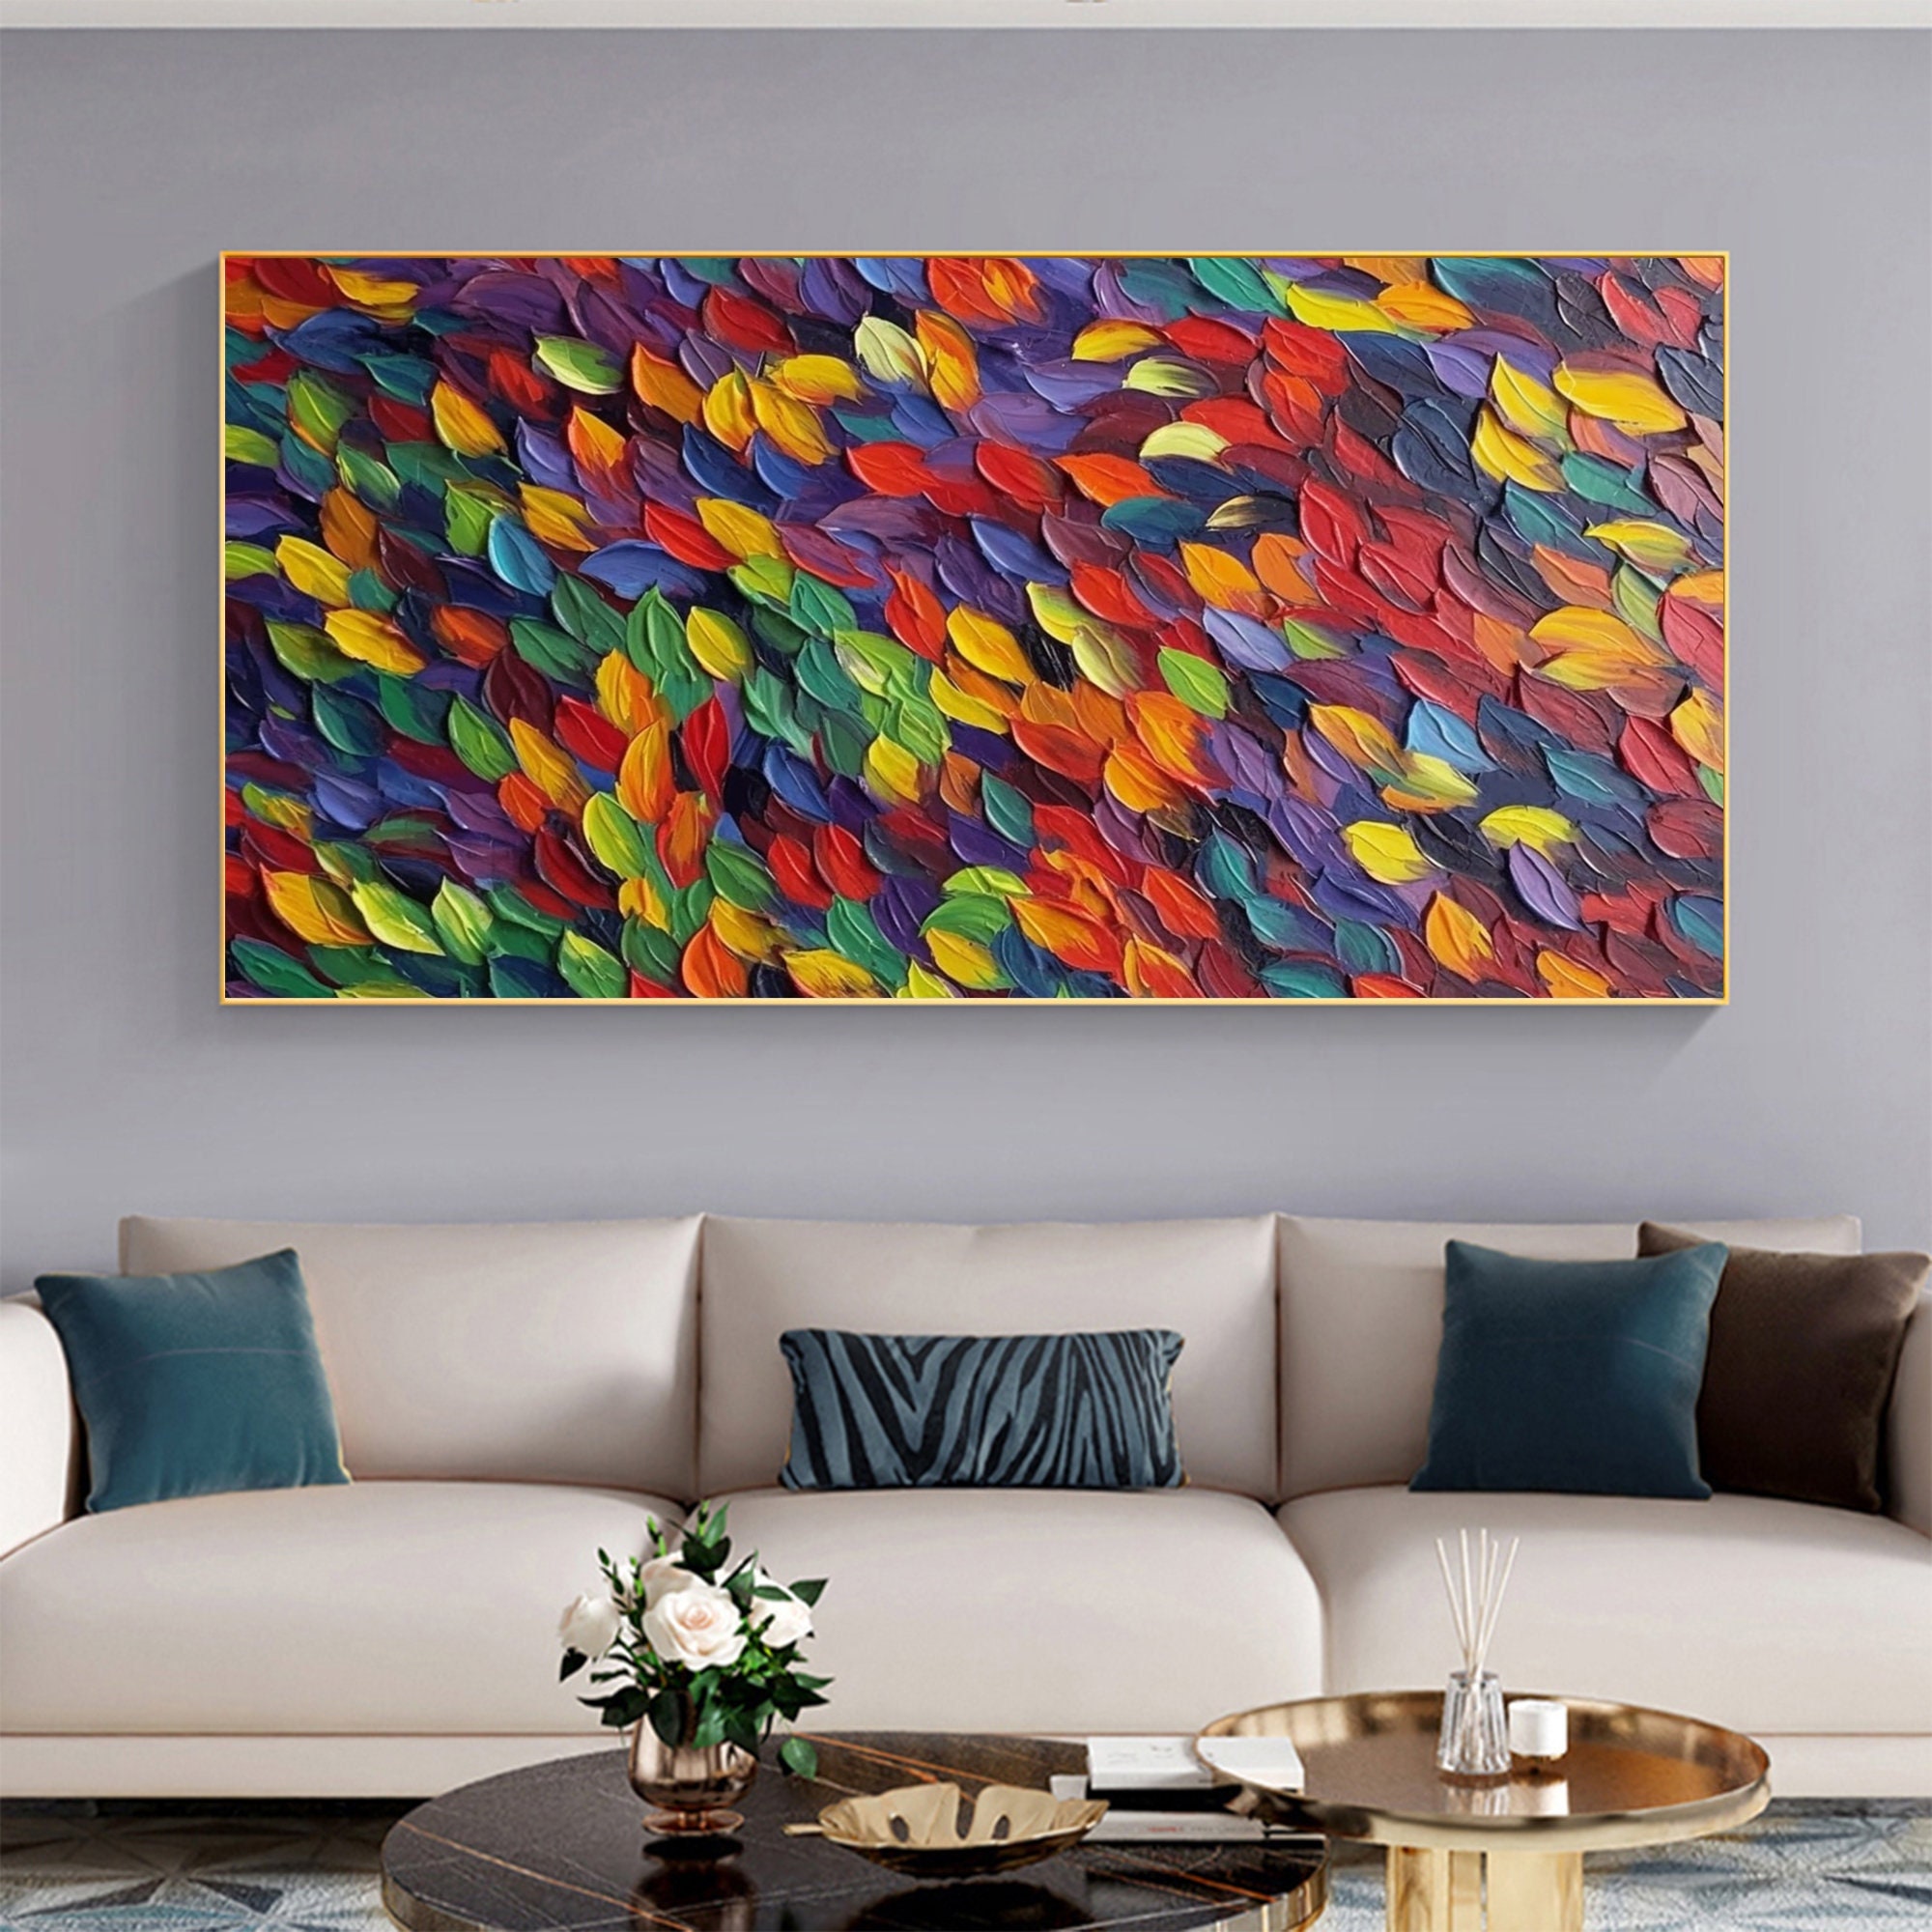 Room Colorful Etsy Canvas Painting, - Original Painting Abstract Custom on Wall Oil Colorful Art, Painting,living Canvas, Decor Wall Feathers Large